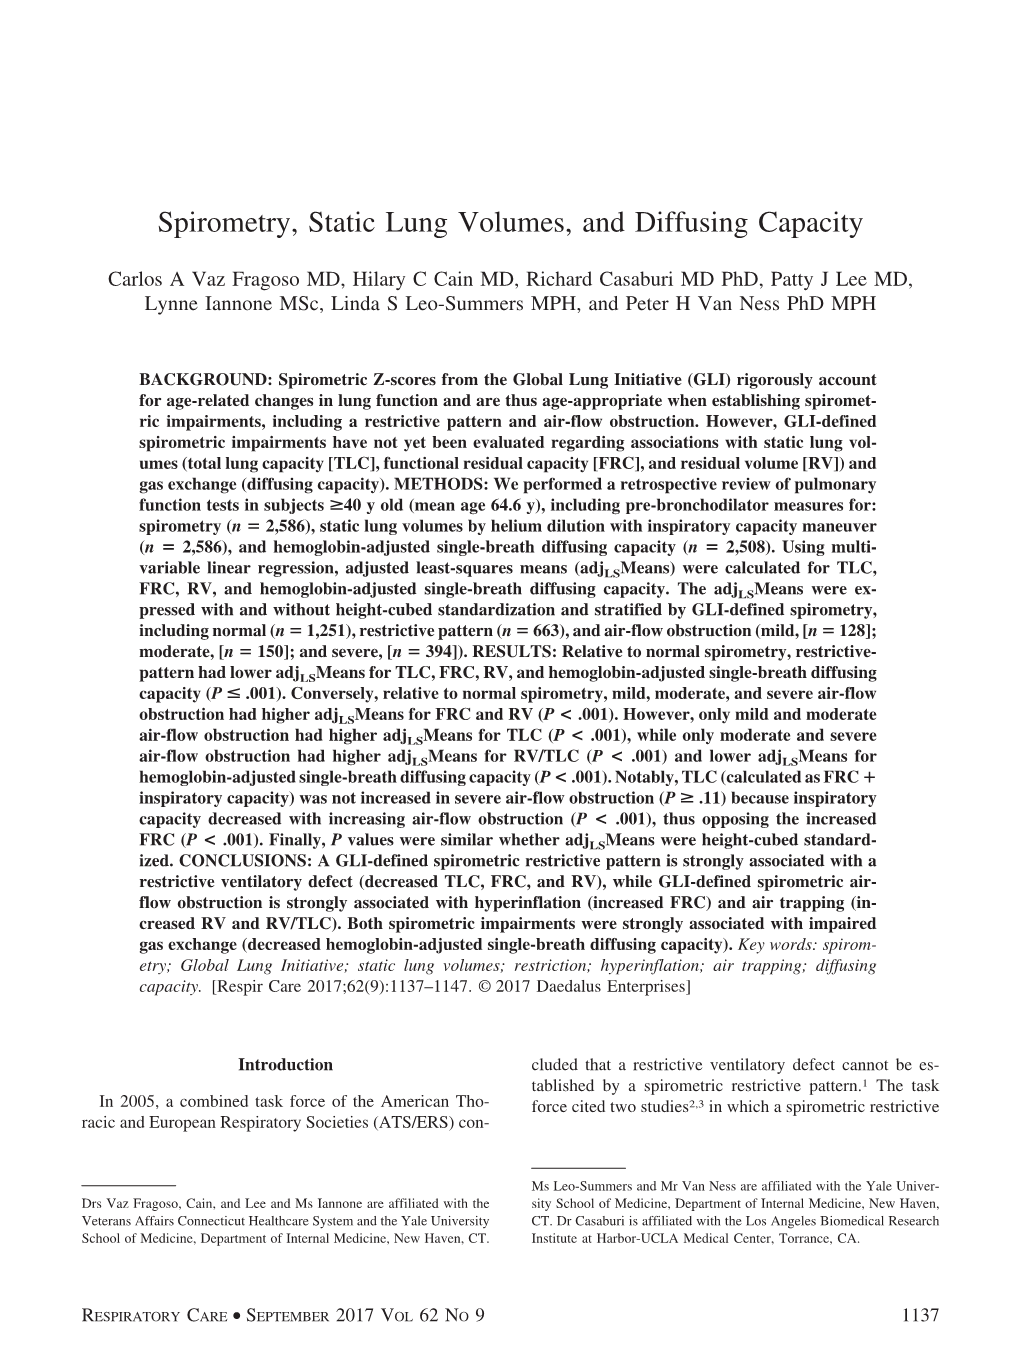 Spirometry, Static Lung Volumes, and Diffusing Capacity